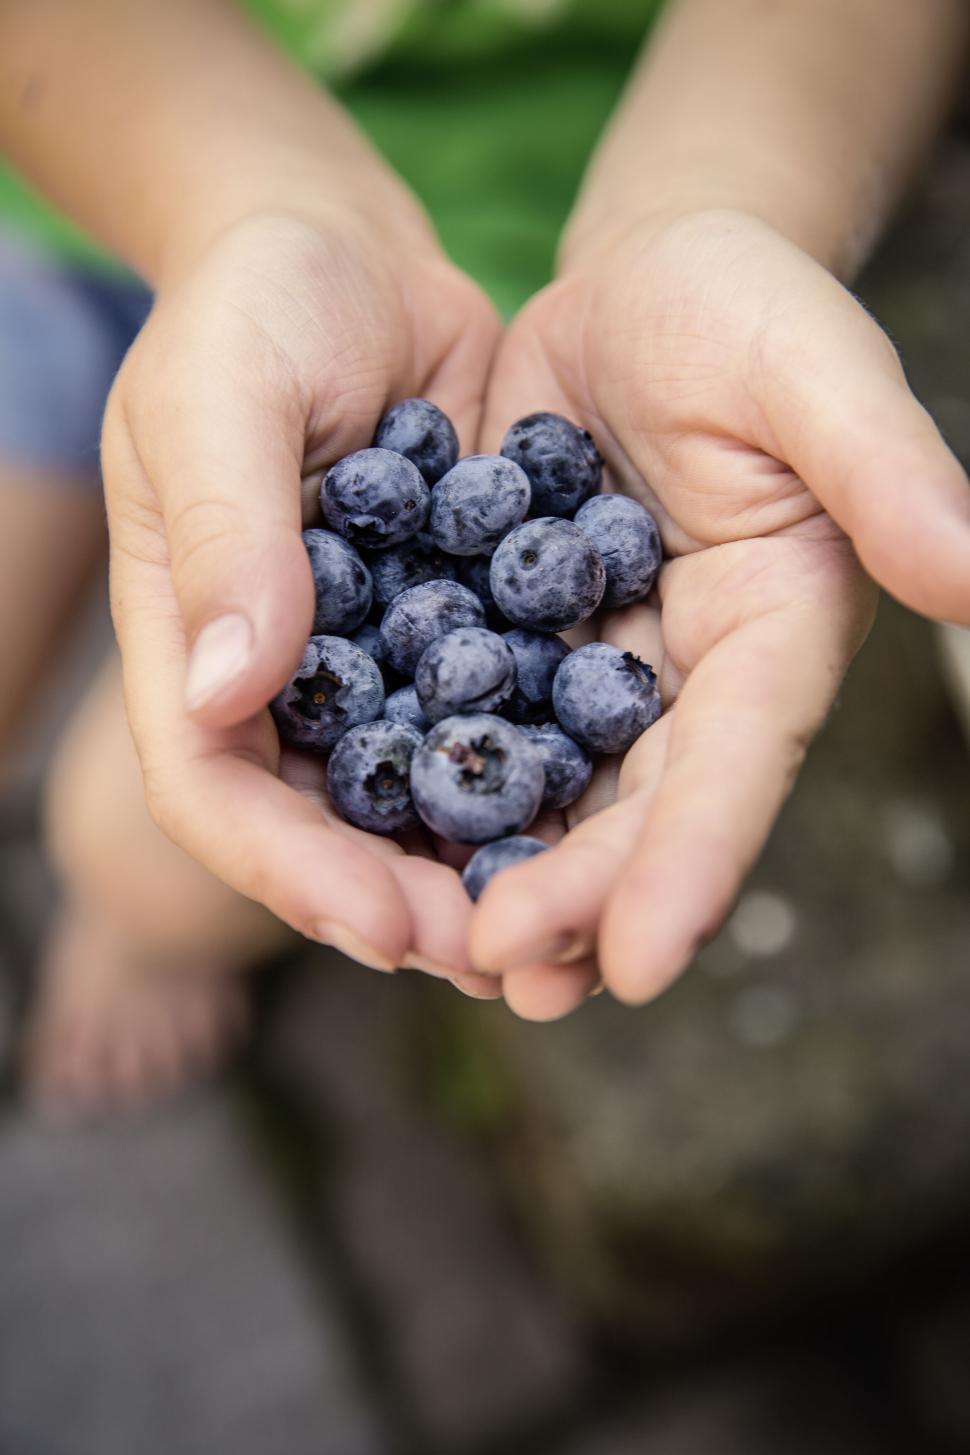 Free Image of Hands holding fresh blueberries closeup 